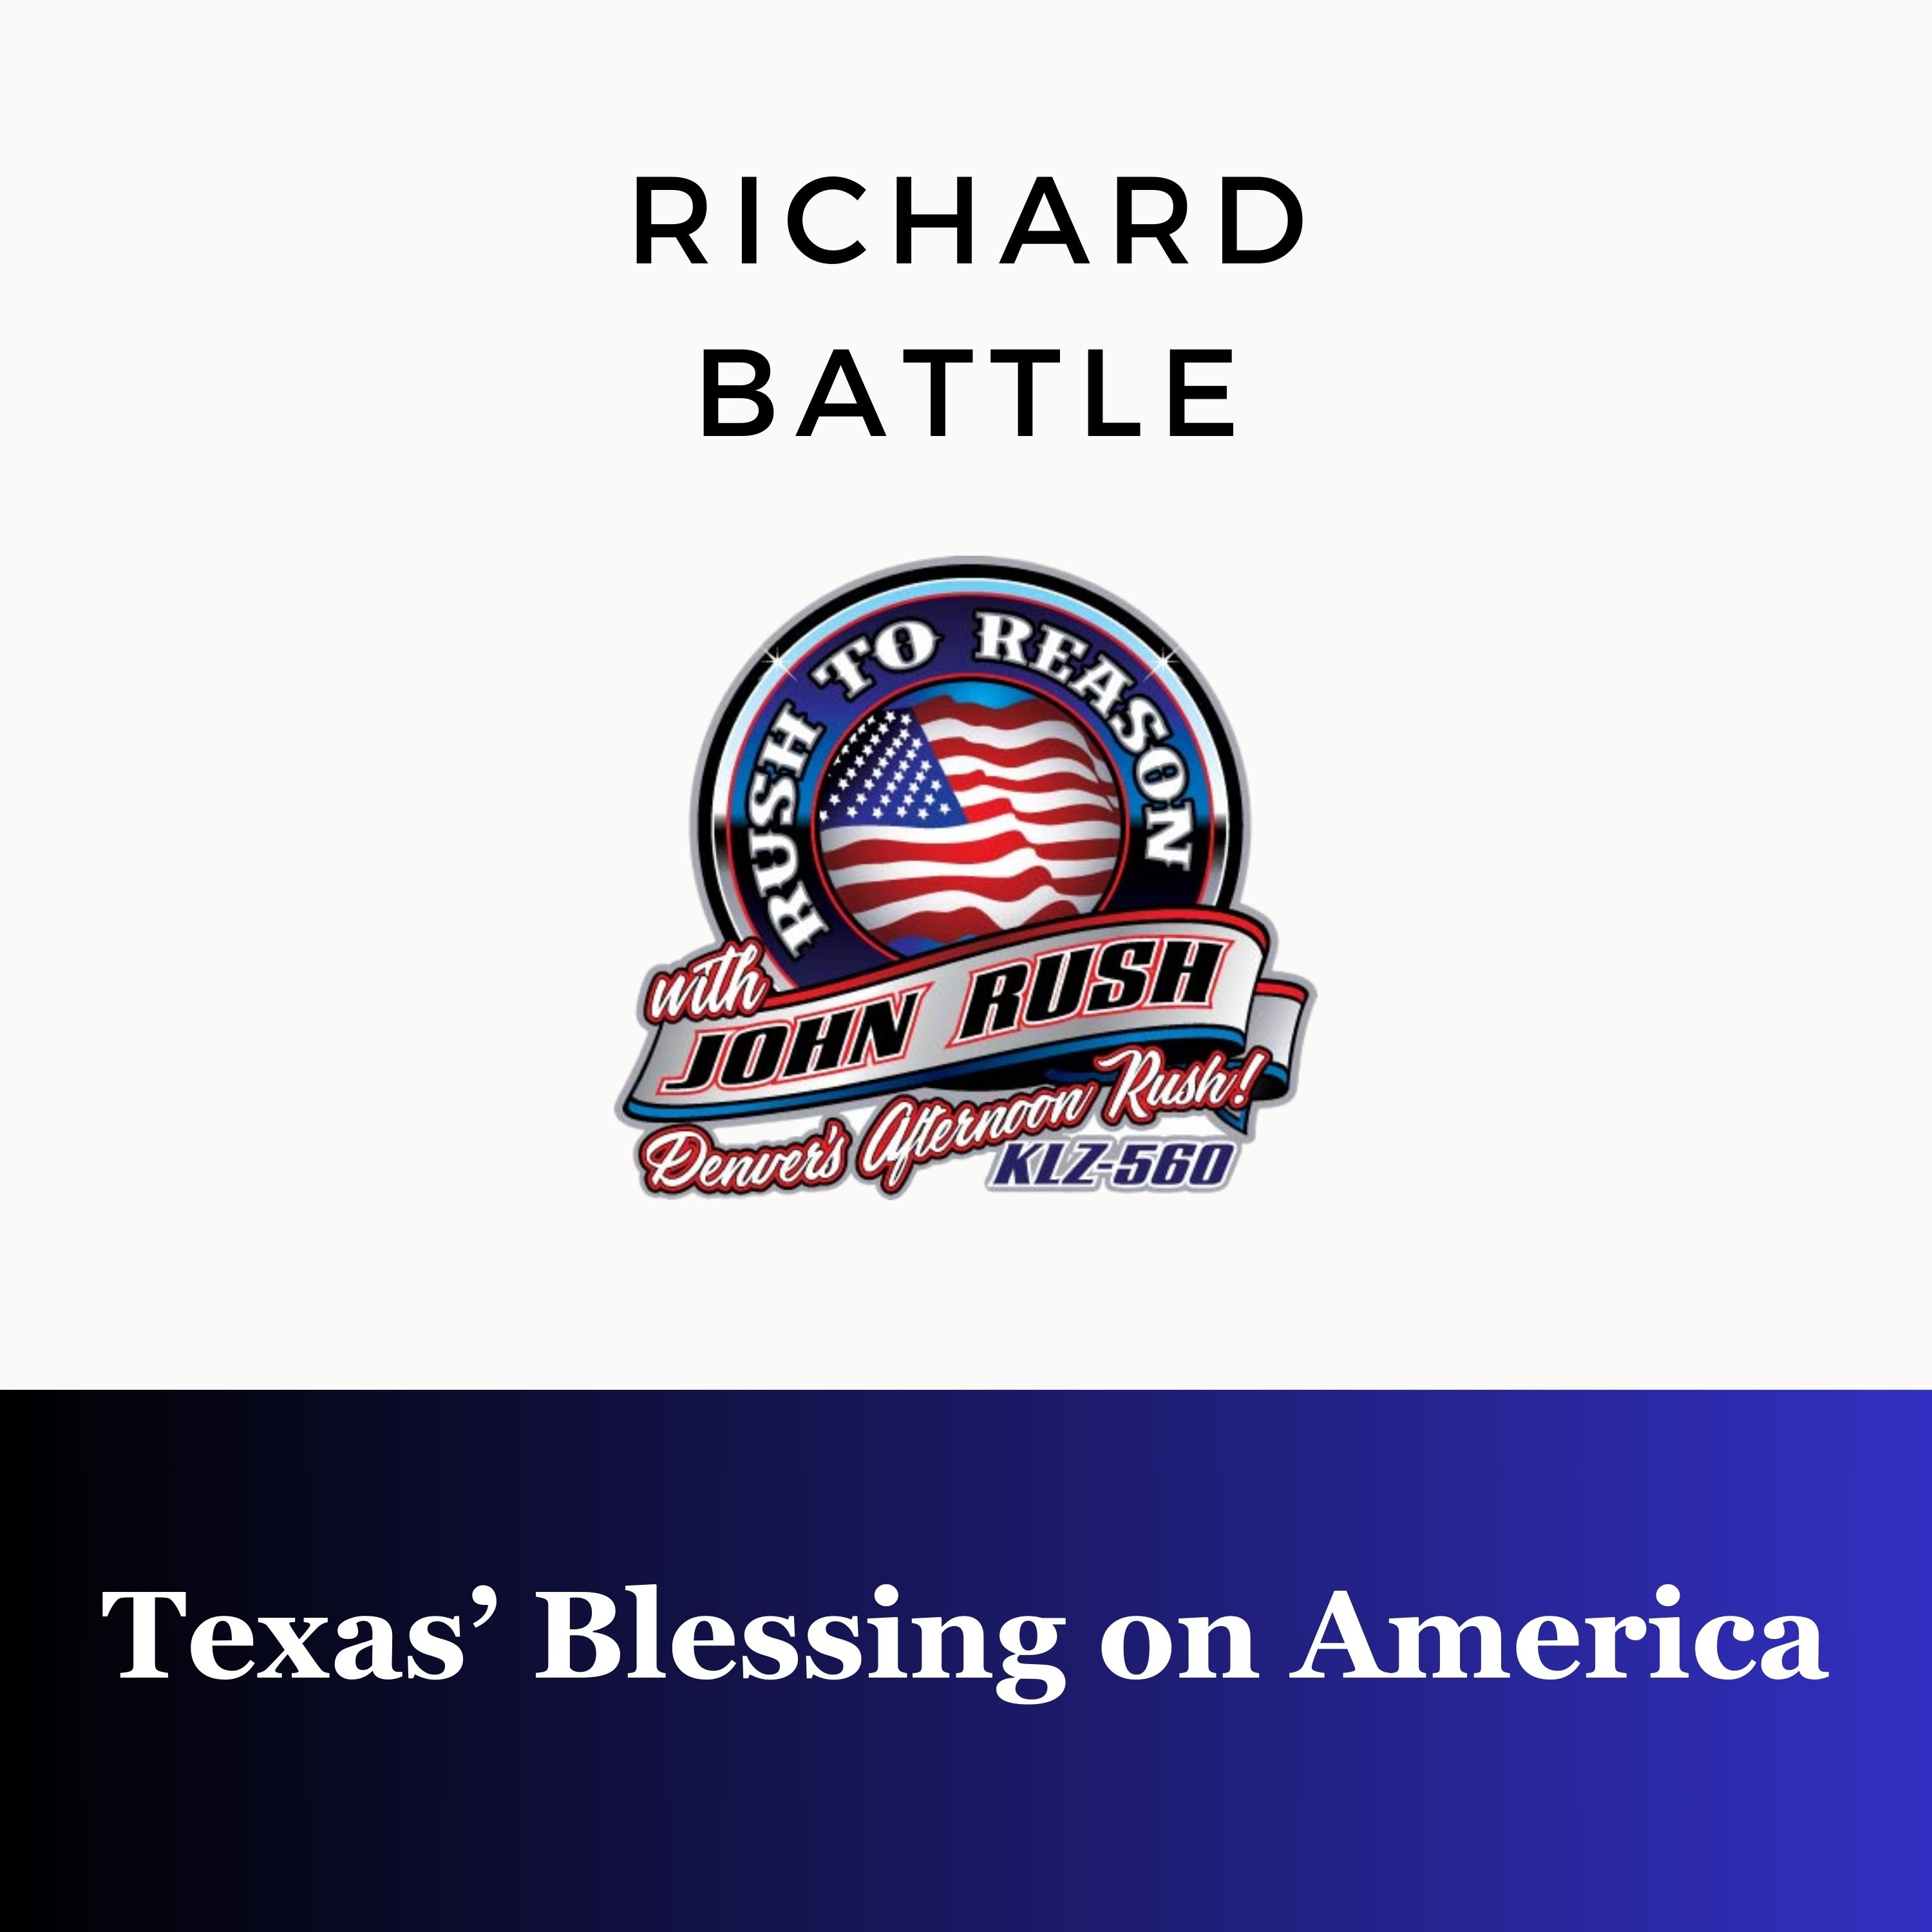 Texas’ Blessing on America with Richard Battle